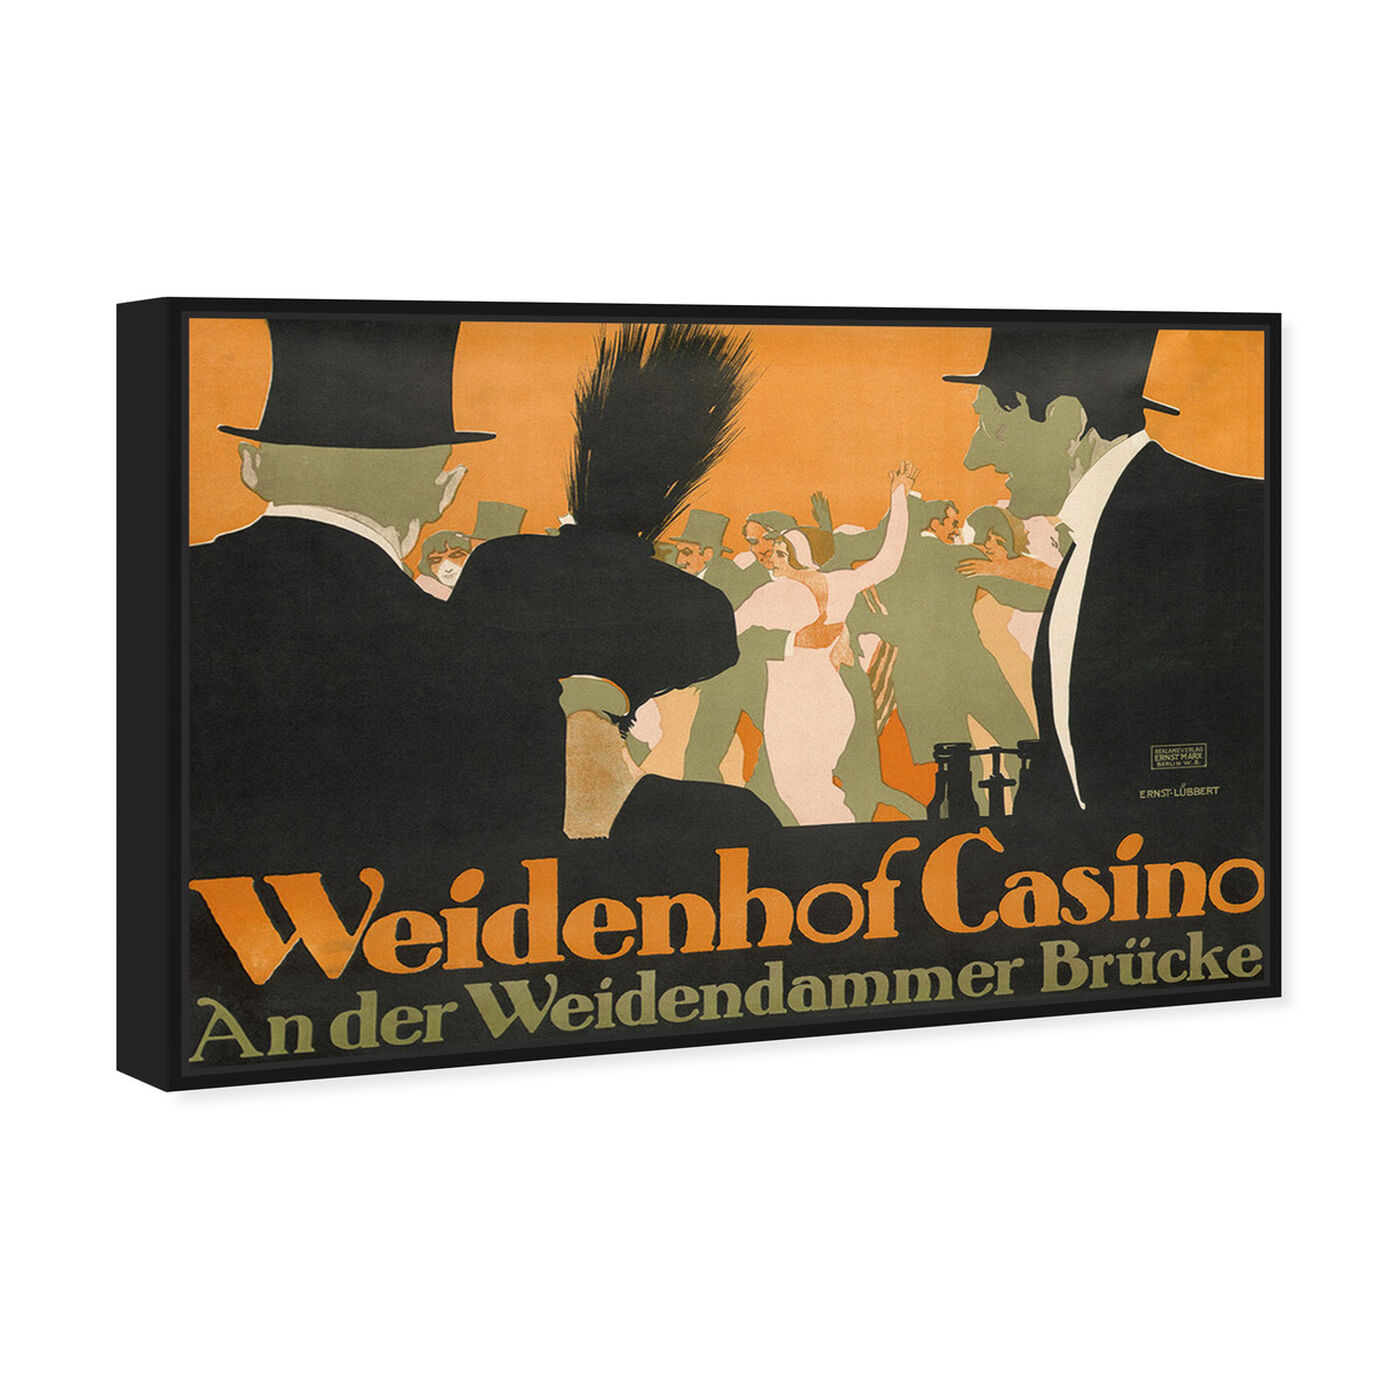 Angled view of Weidenhof Casino featuring advertising and posters art.